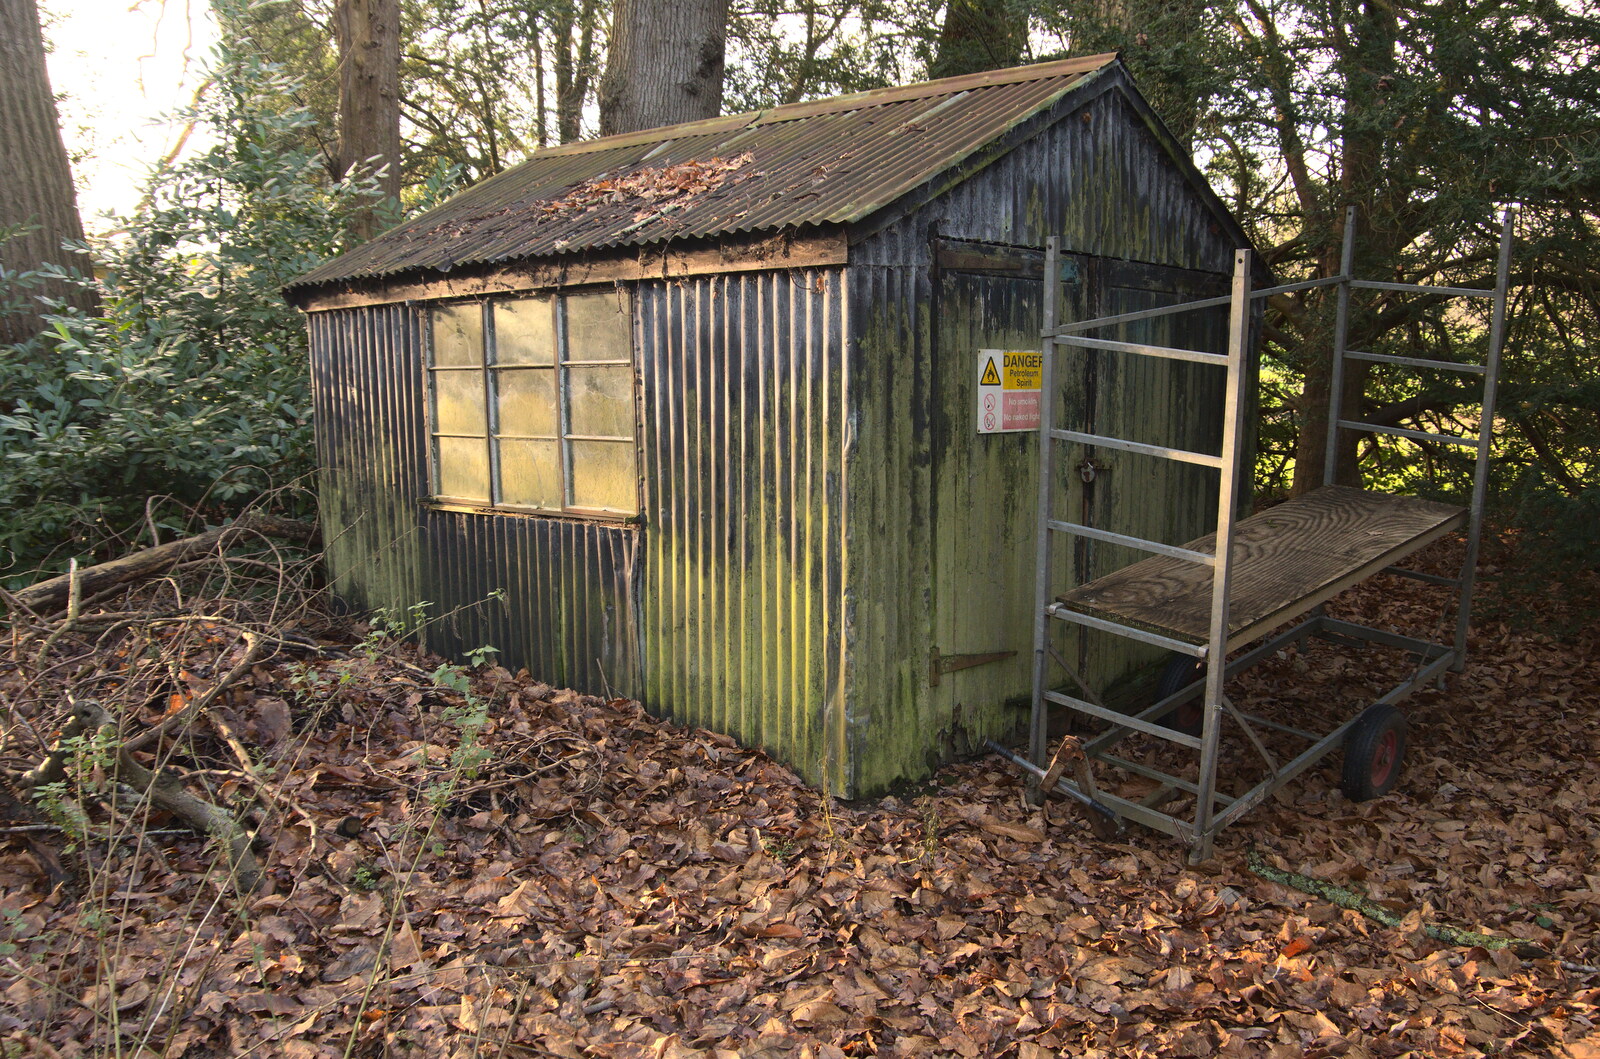 A near-derelict shed in the woods from A Visit to Blickling Hall, Aylsham, Norfolk - 9th January 2022